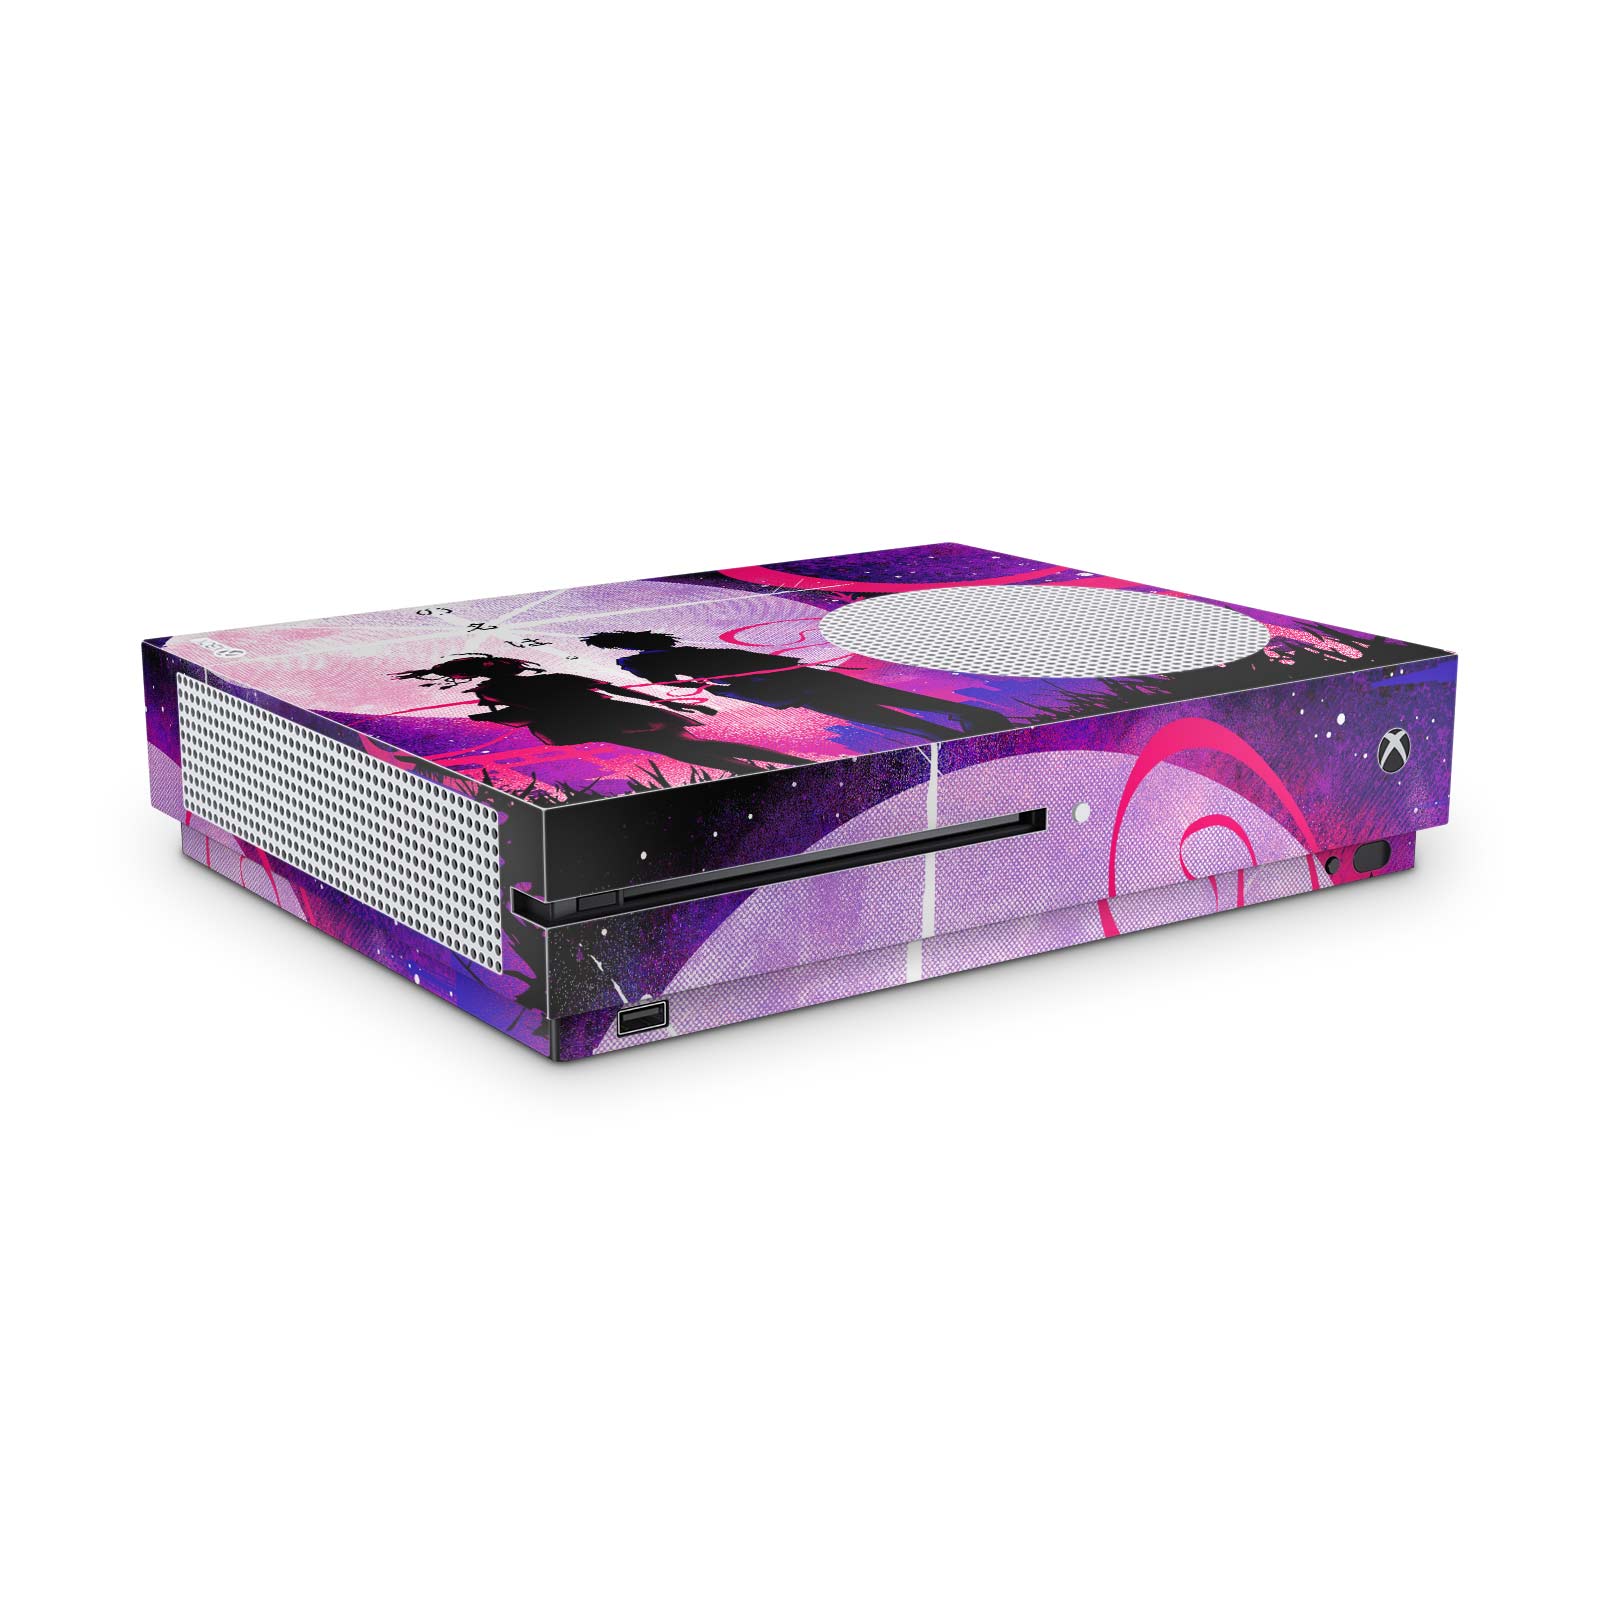 Your Name - Xbox One S Console Skin